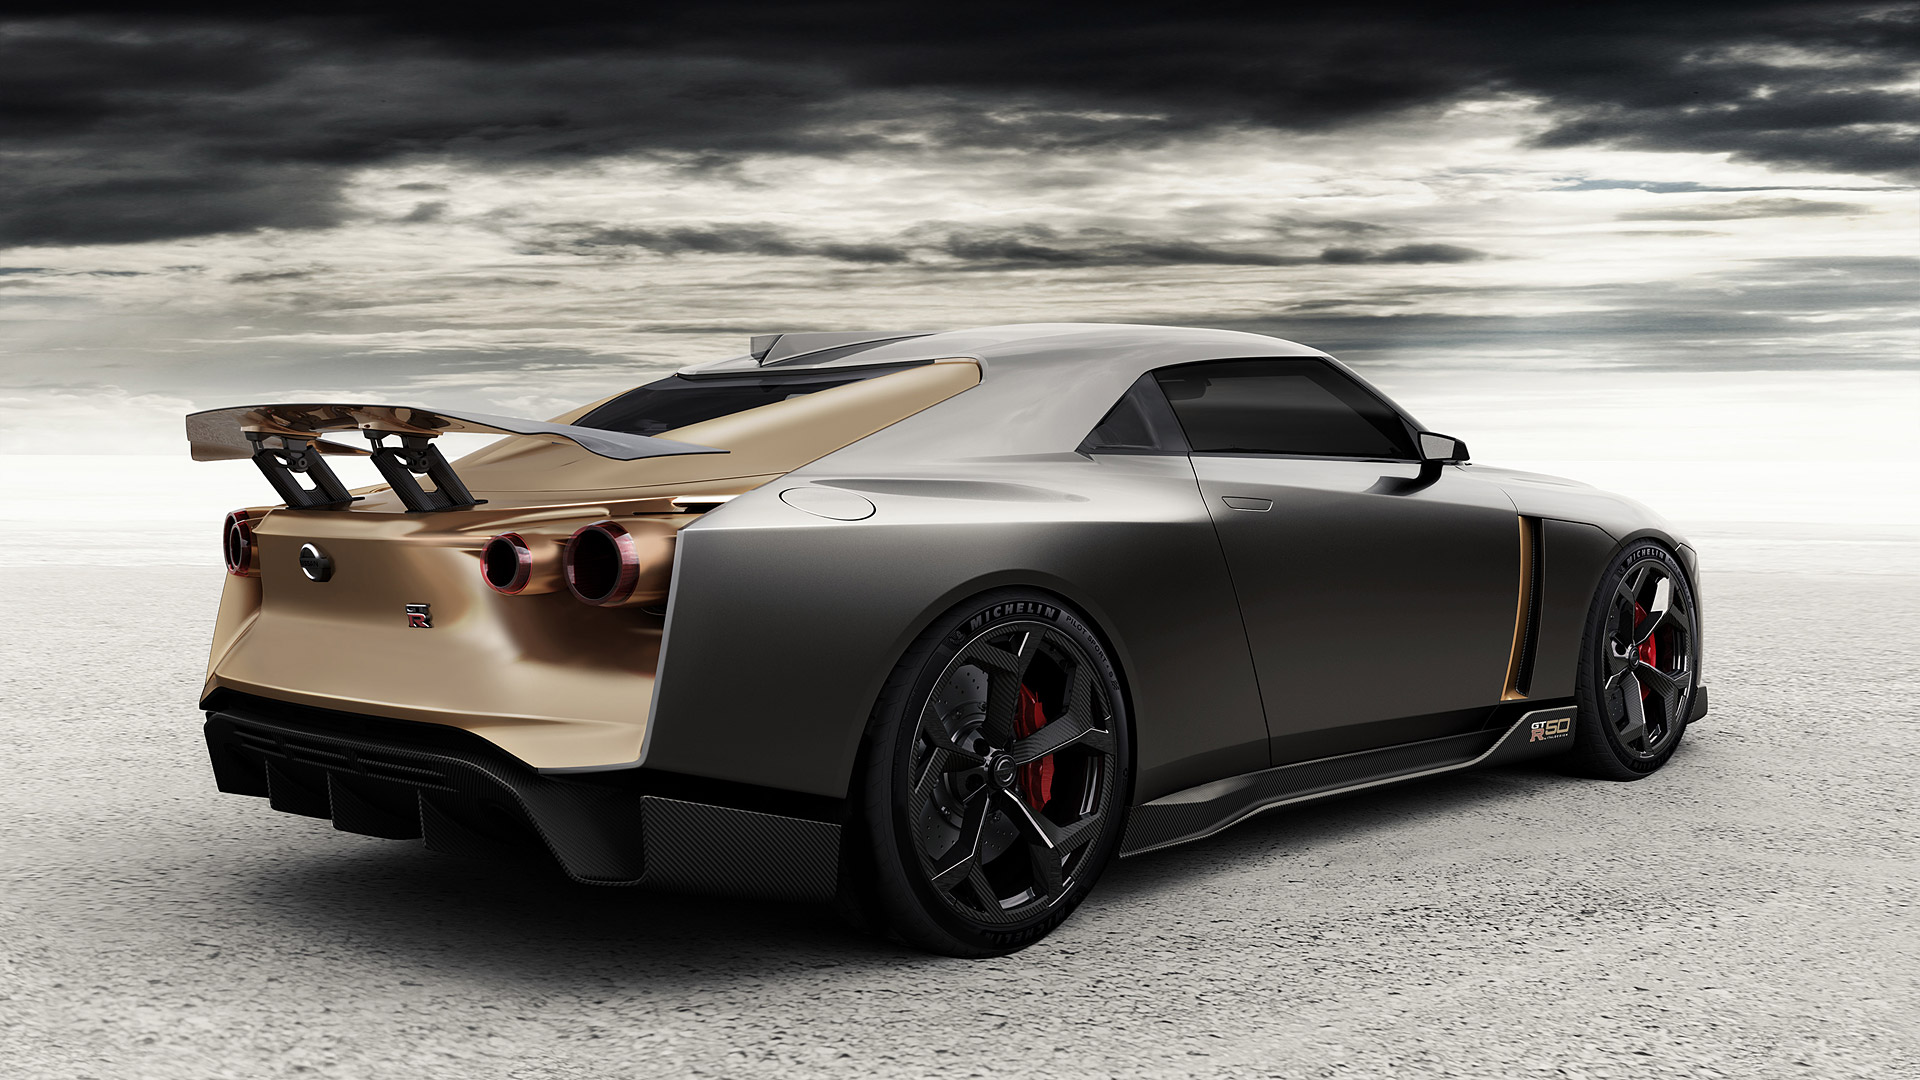  2018 Nissan GT-R50 by Italdesign Concept Wallpaper.